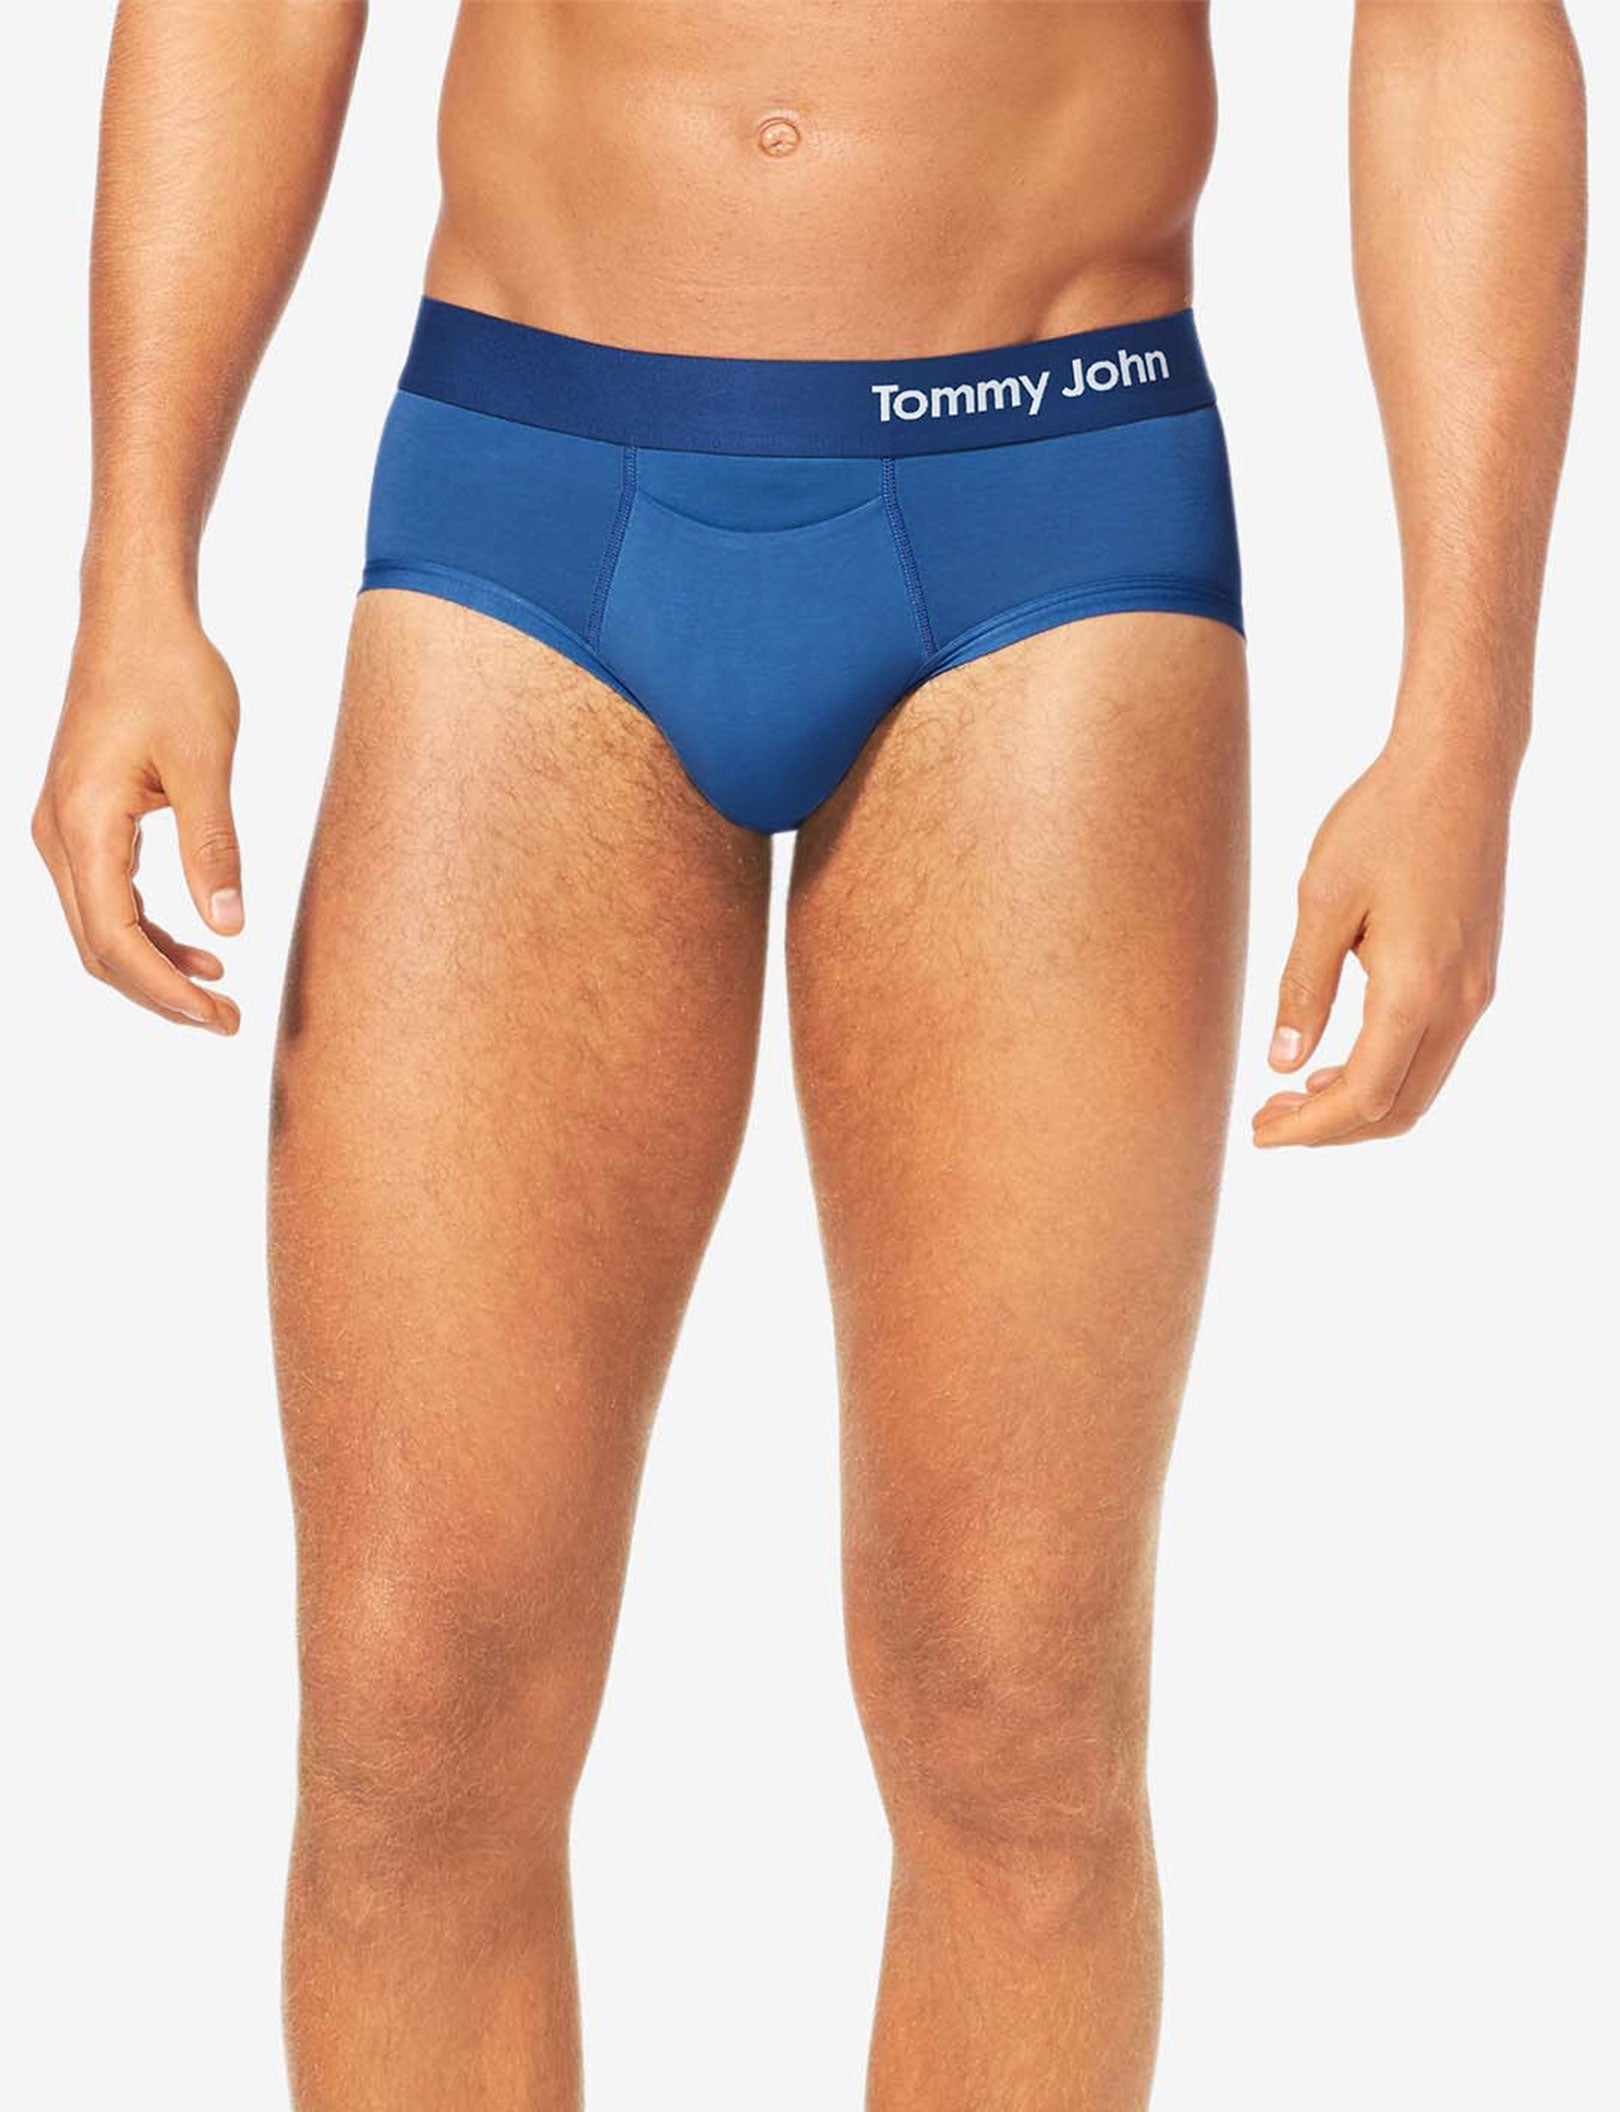 tommy john cool cotton brief